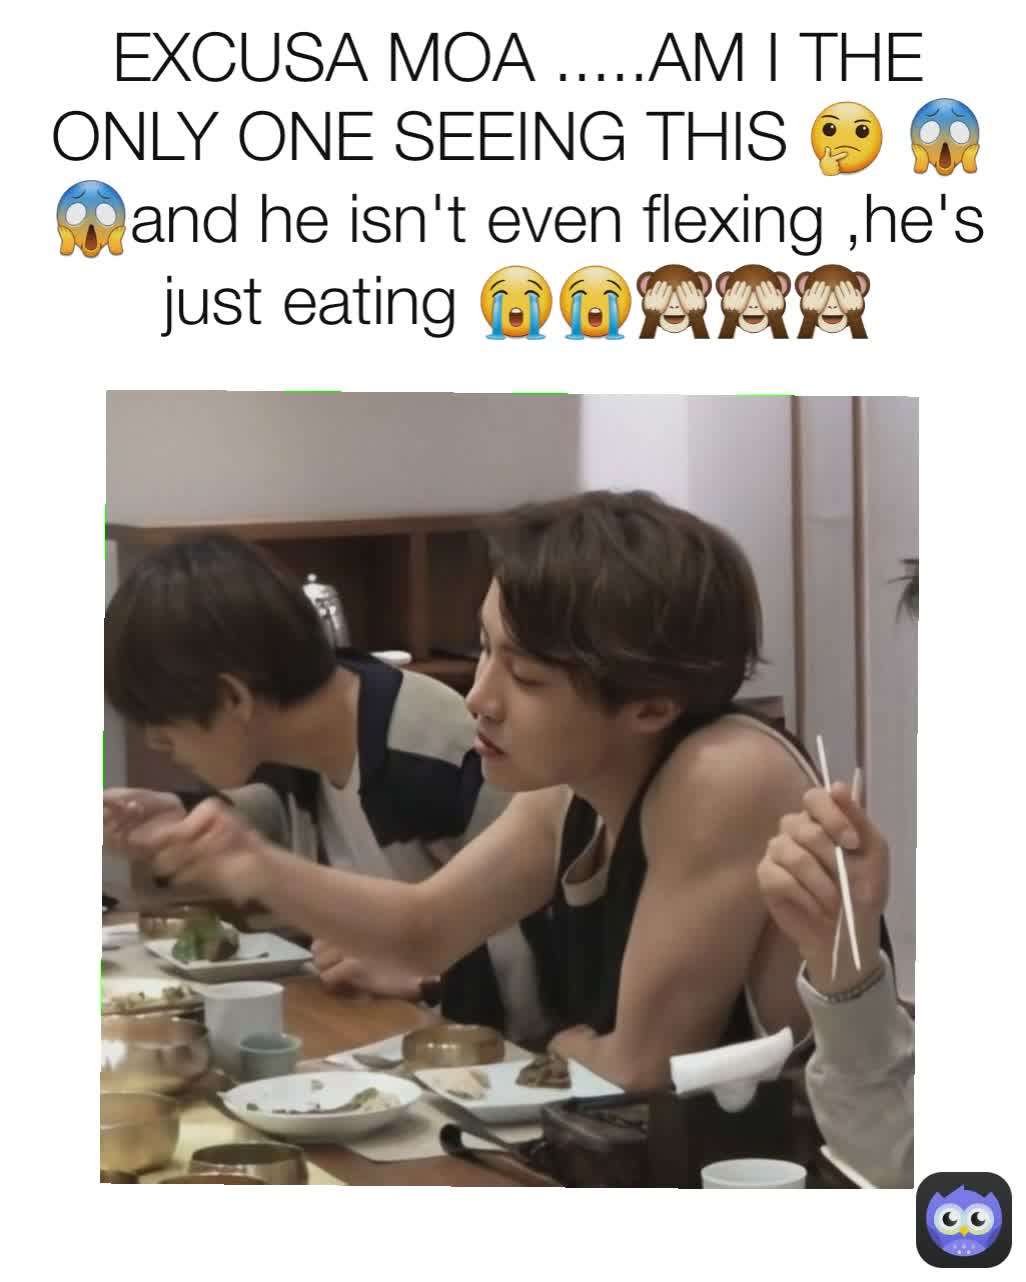 EXCUSA MOA .....AM I THE ONLY ONE SEEING THIS 🤔 😱😱and he isn't even flexing ,he's just eating 😭😭🙈🙈🙈